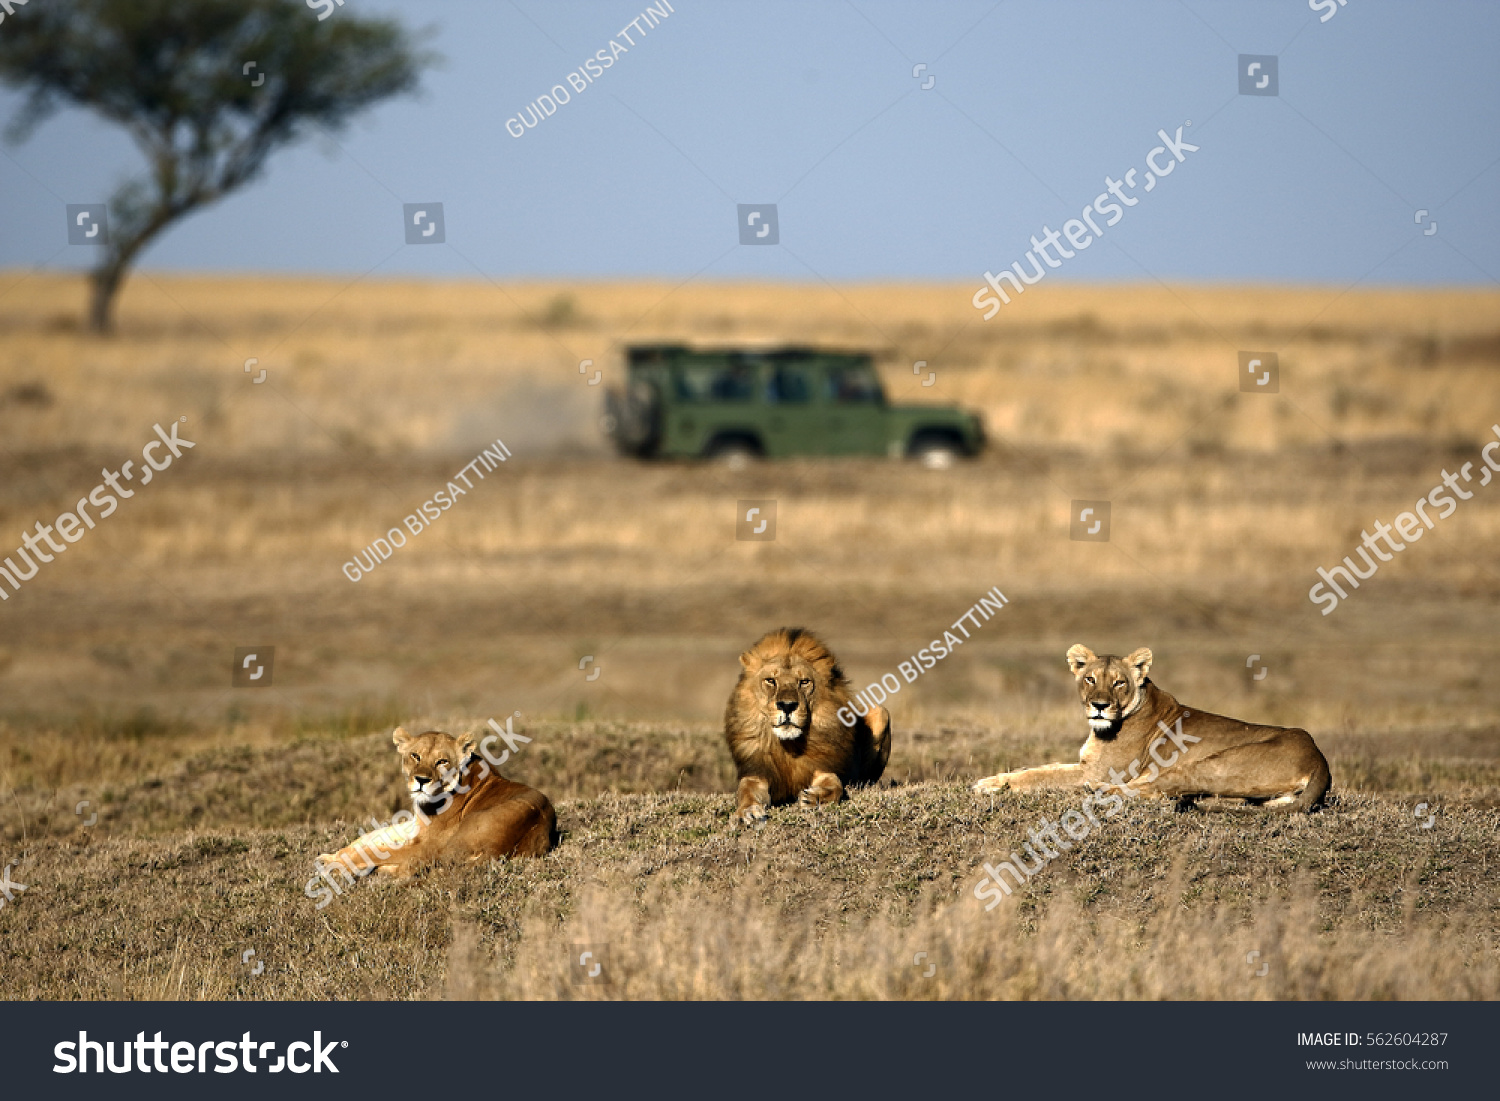 Lion and lionesses  in the savannah with land rover and acacia tree on slightly blurred  background  #562604287